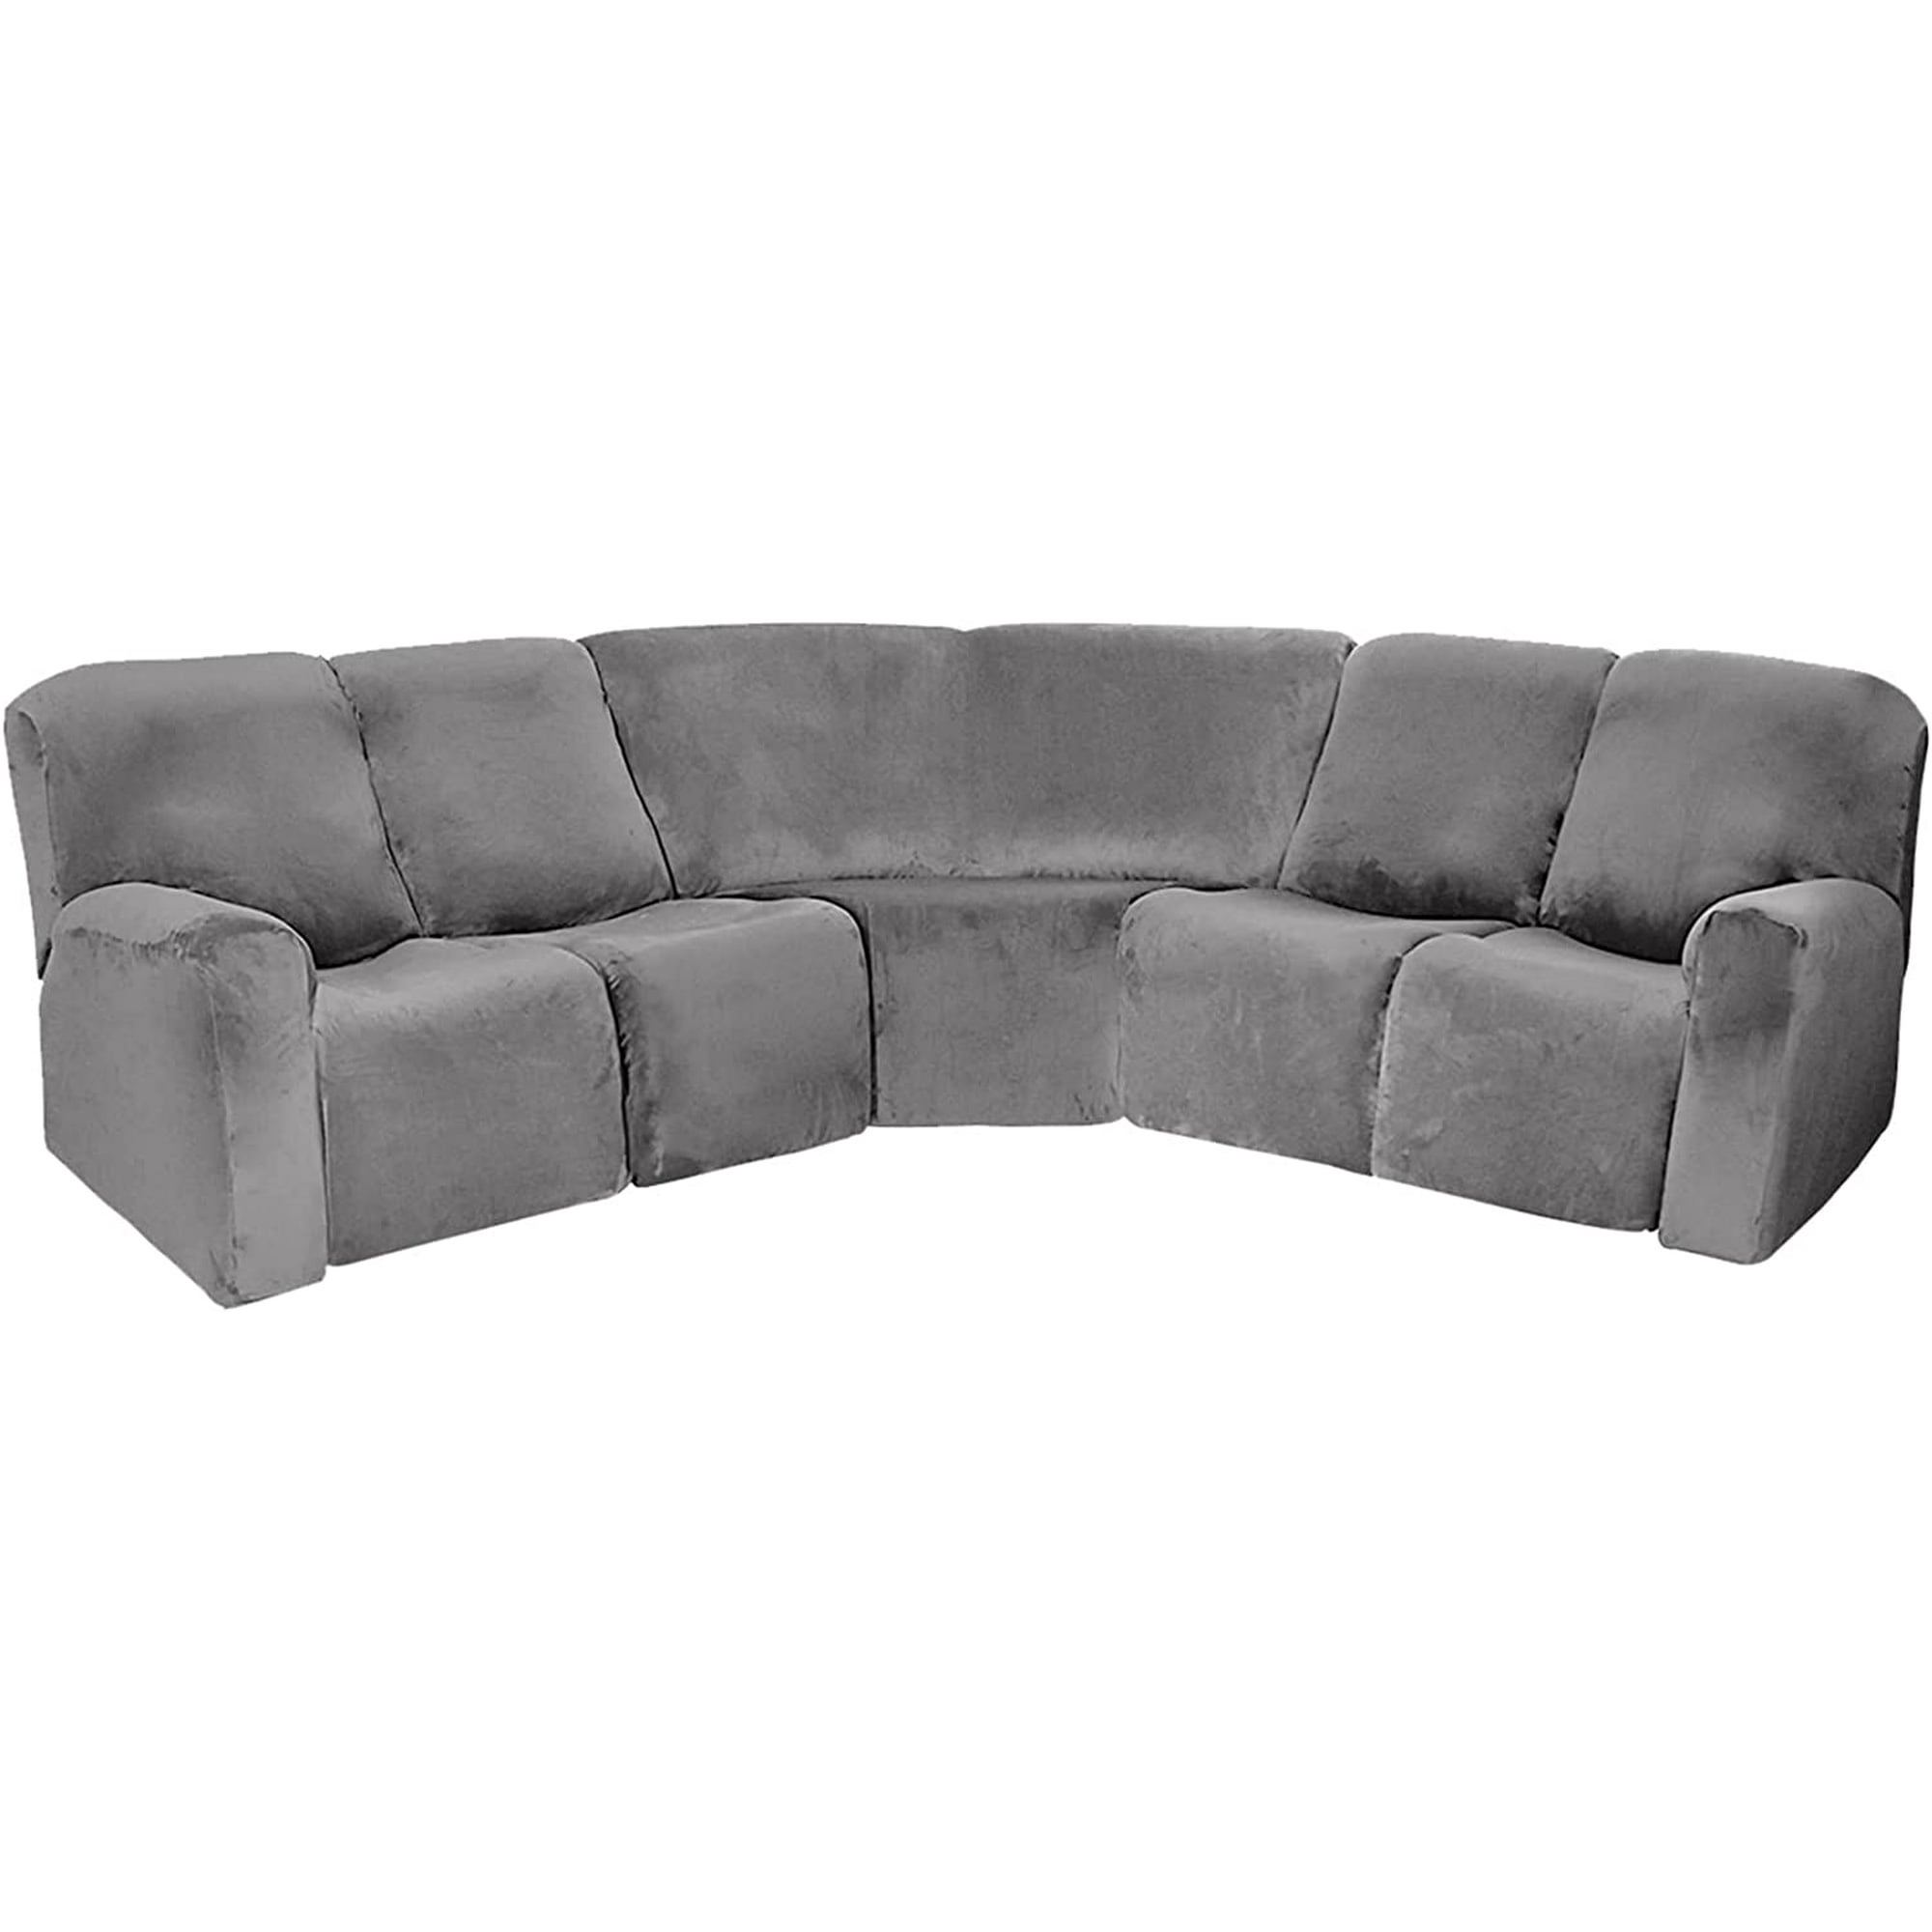 Velvet Stretch Recliner 5 Seats Corner Sectional Sofa Cover L-Shape  7-Pieces Reclining Sectional Couch Covers for Reclining Loveseat Sofa  Slipcovers